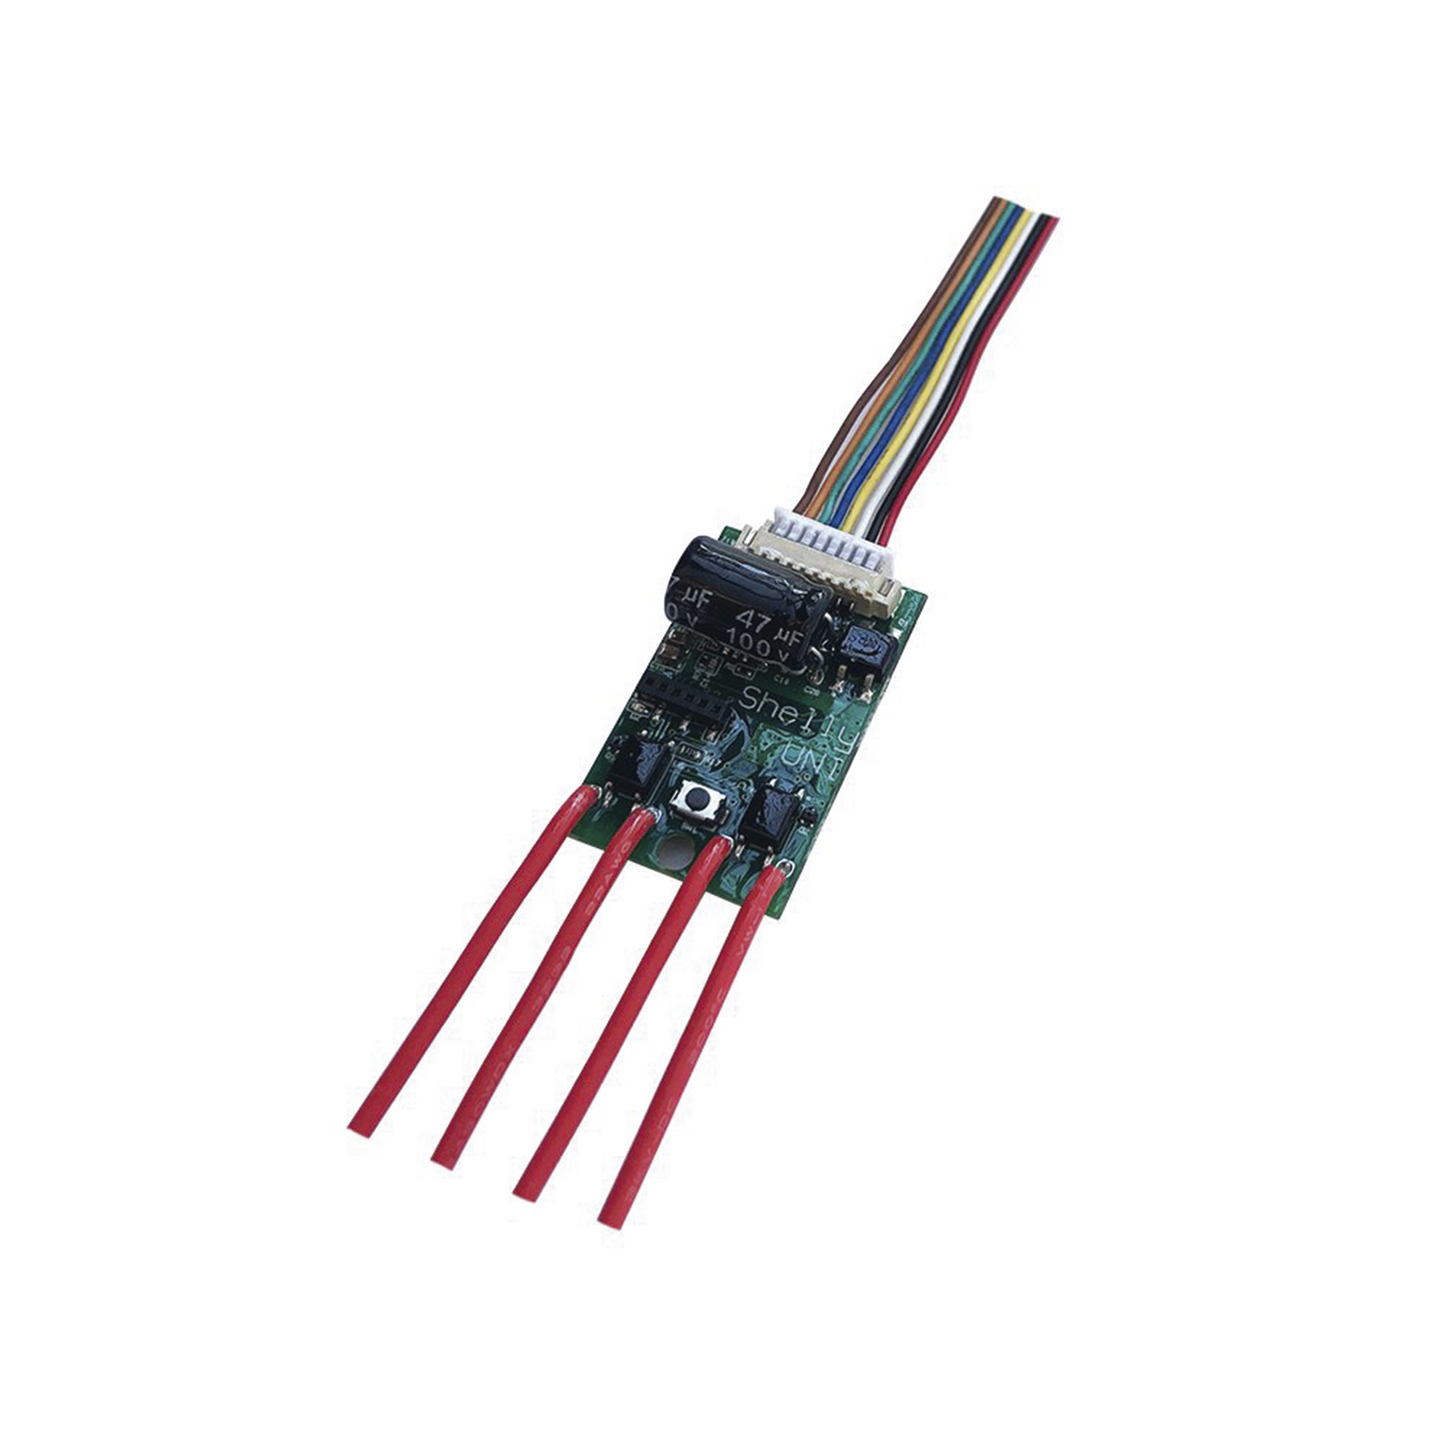 Smart Tiny Smart Relay Wi-Fi operated universal module. Works with AC and DC.